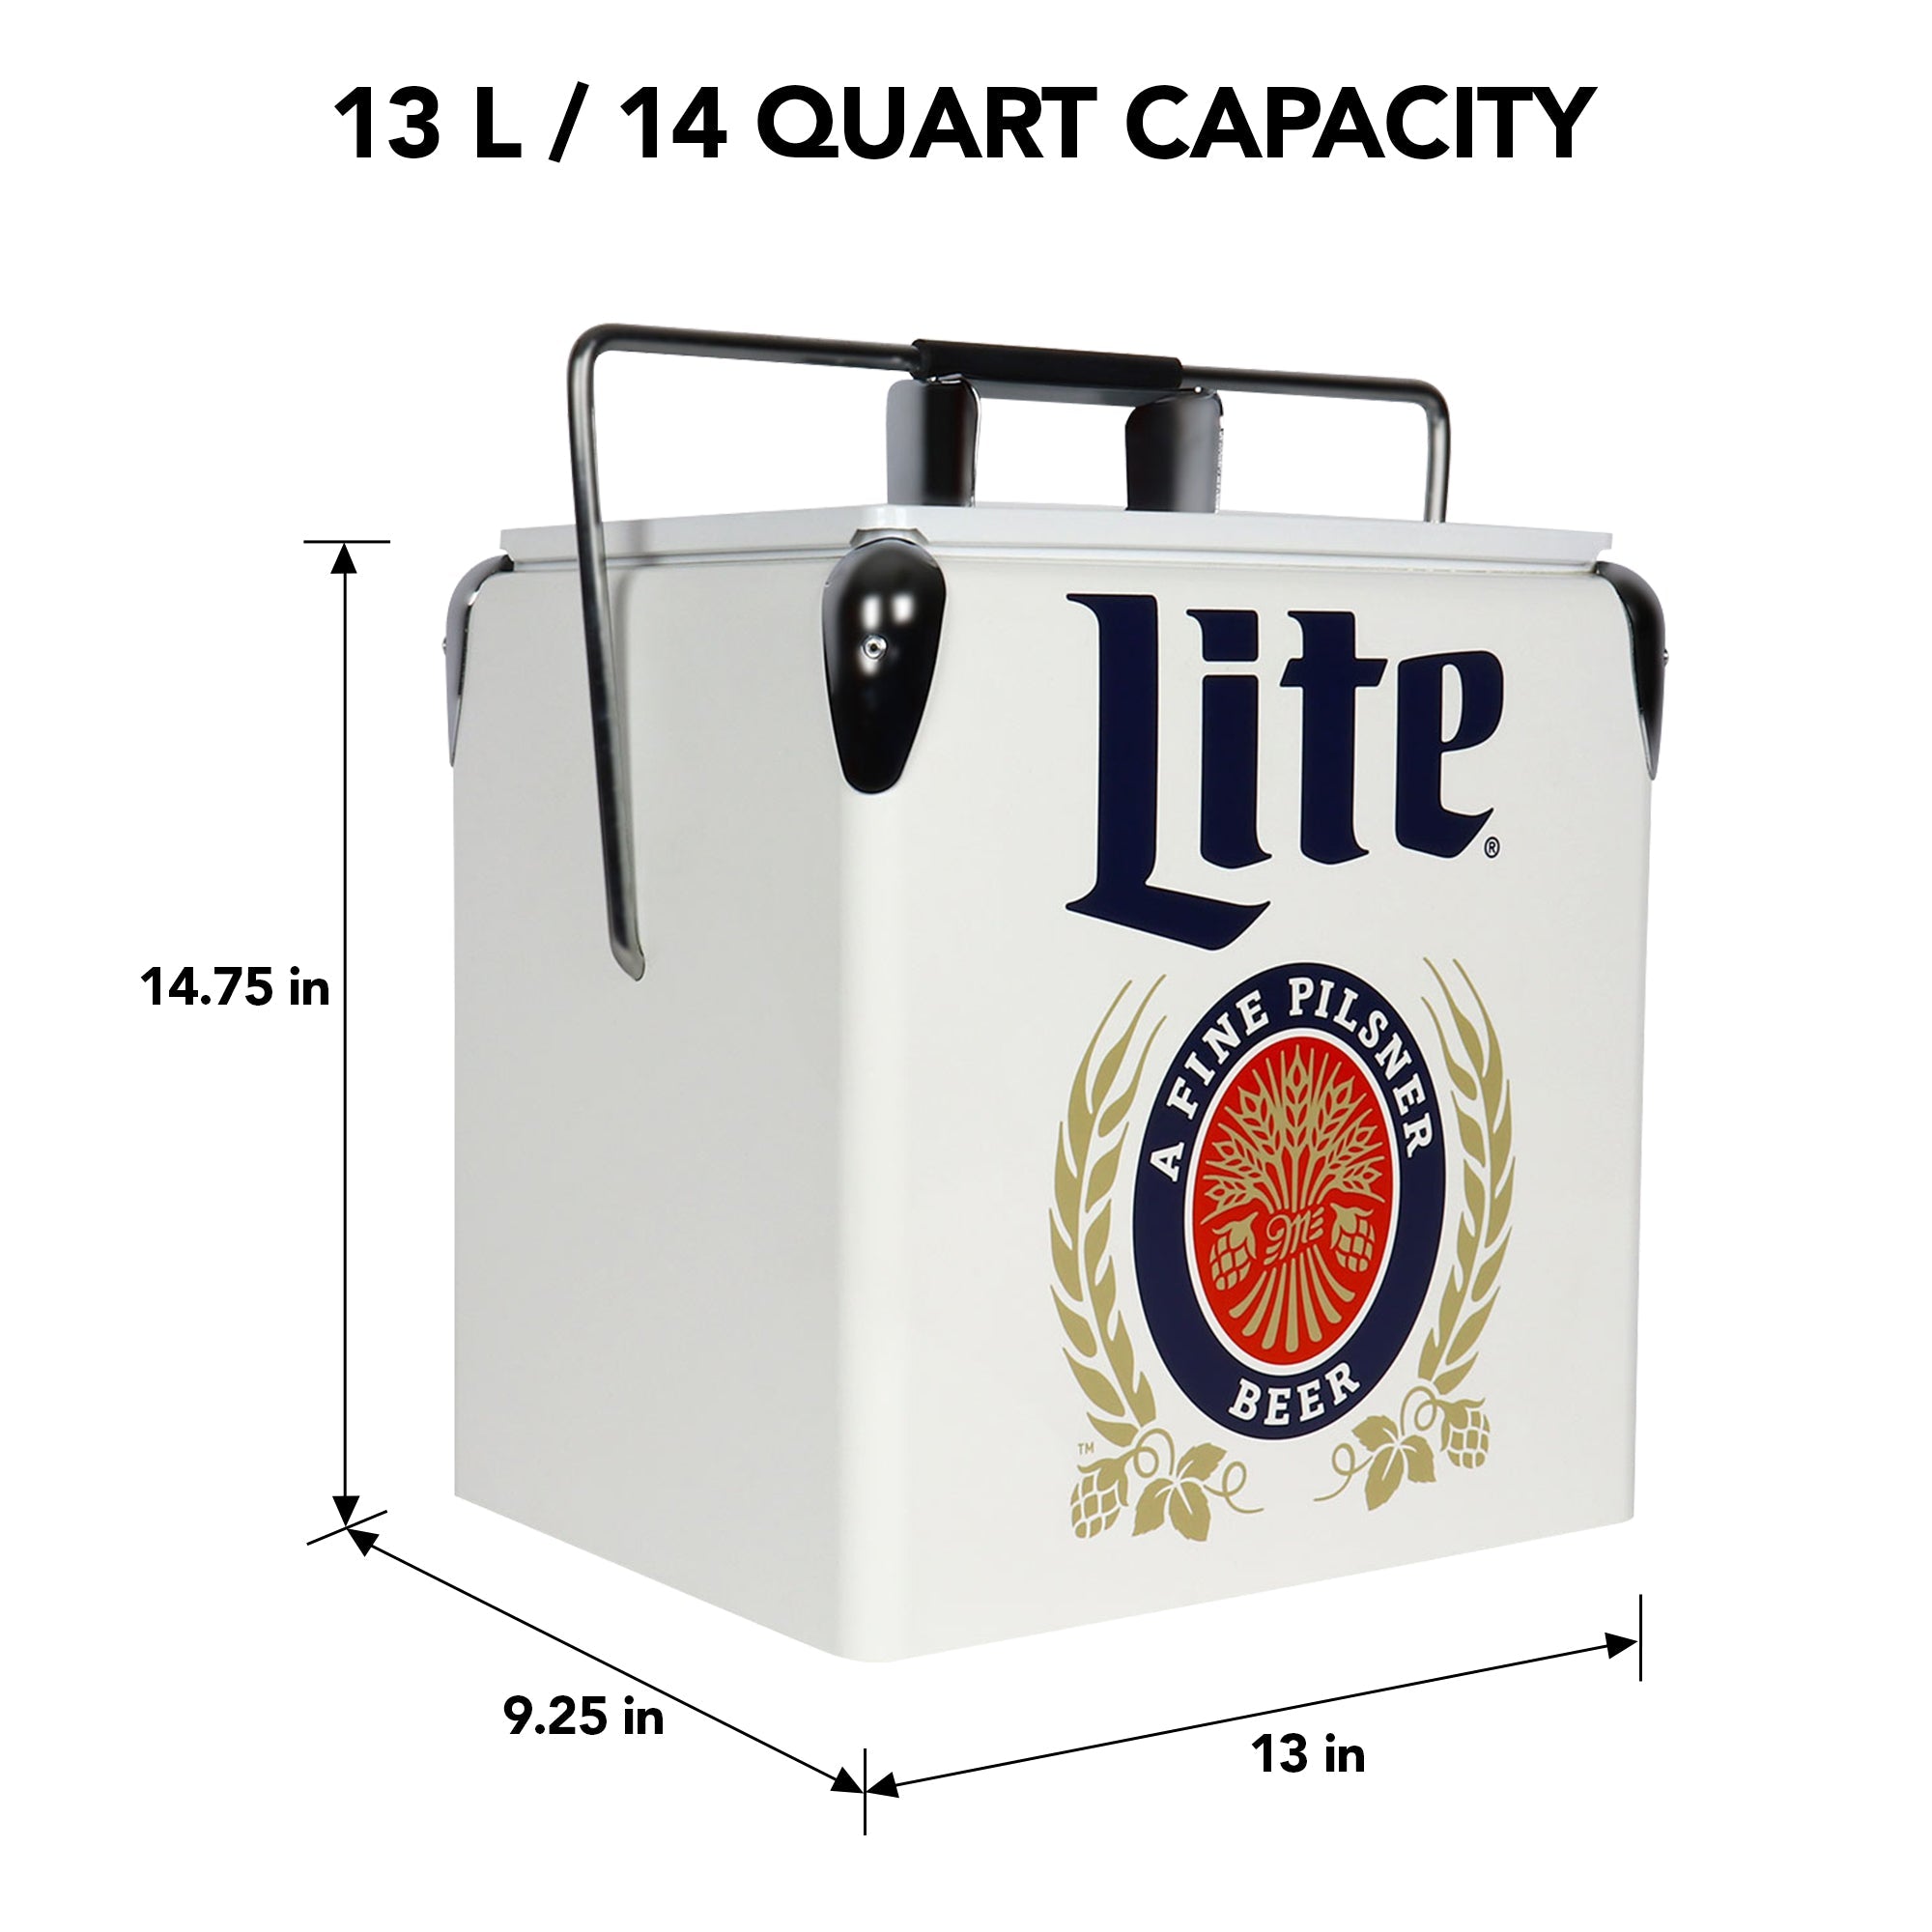 Product shot of Miller Lite retro 14 liter ice chest with bottle opener, closed, on a white background, with dimensions labeled. Text above reads, "13L/14 quart capacity"